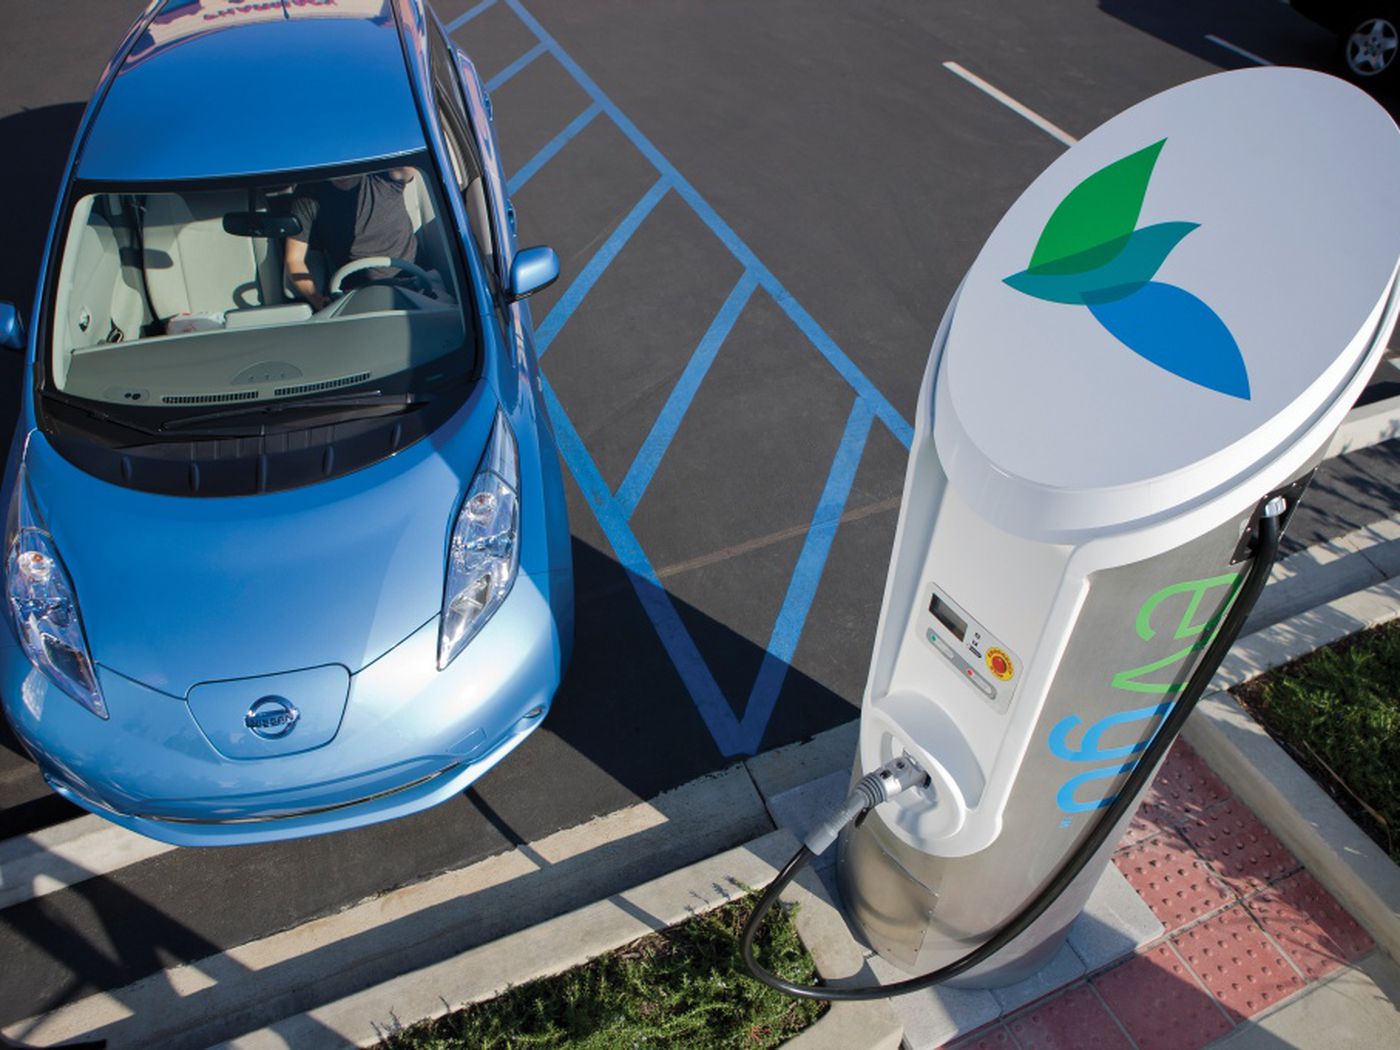 Google Maps now tells you if an EV charging station is in use - The Verge